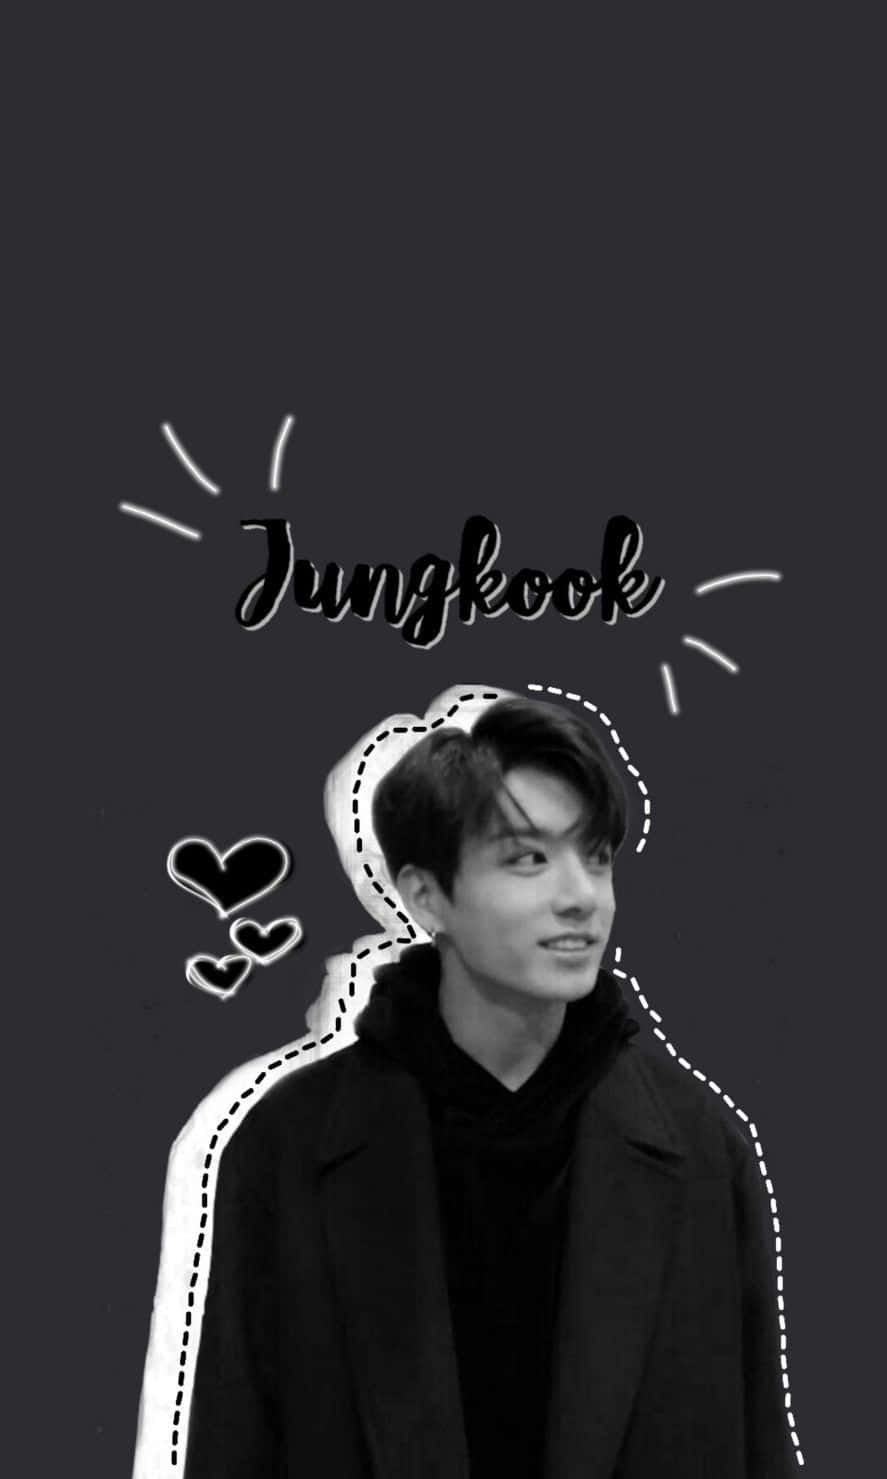 Download Aesthetic White And Black iPhone Jungkook Bts Wallpaper